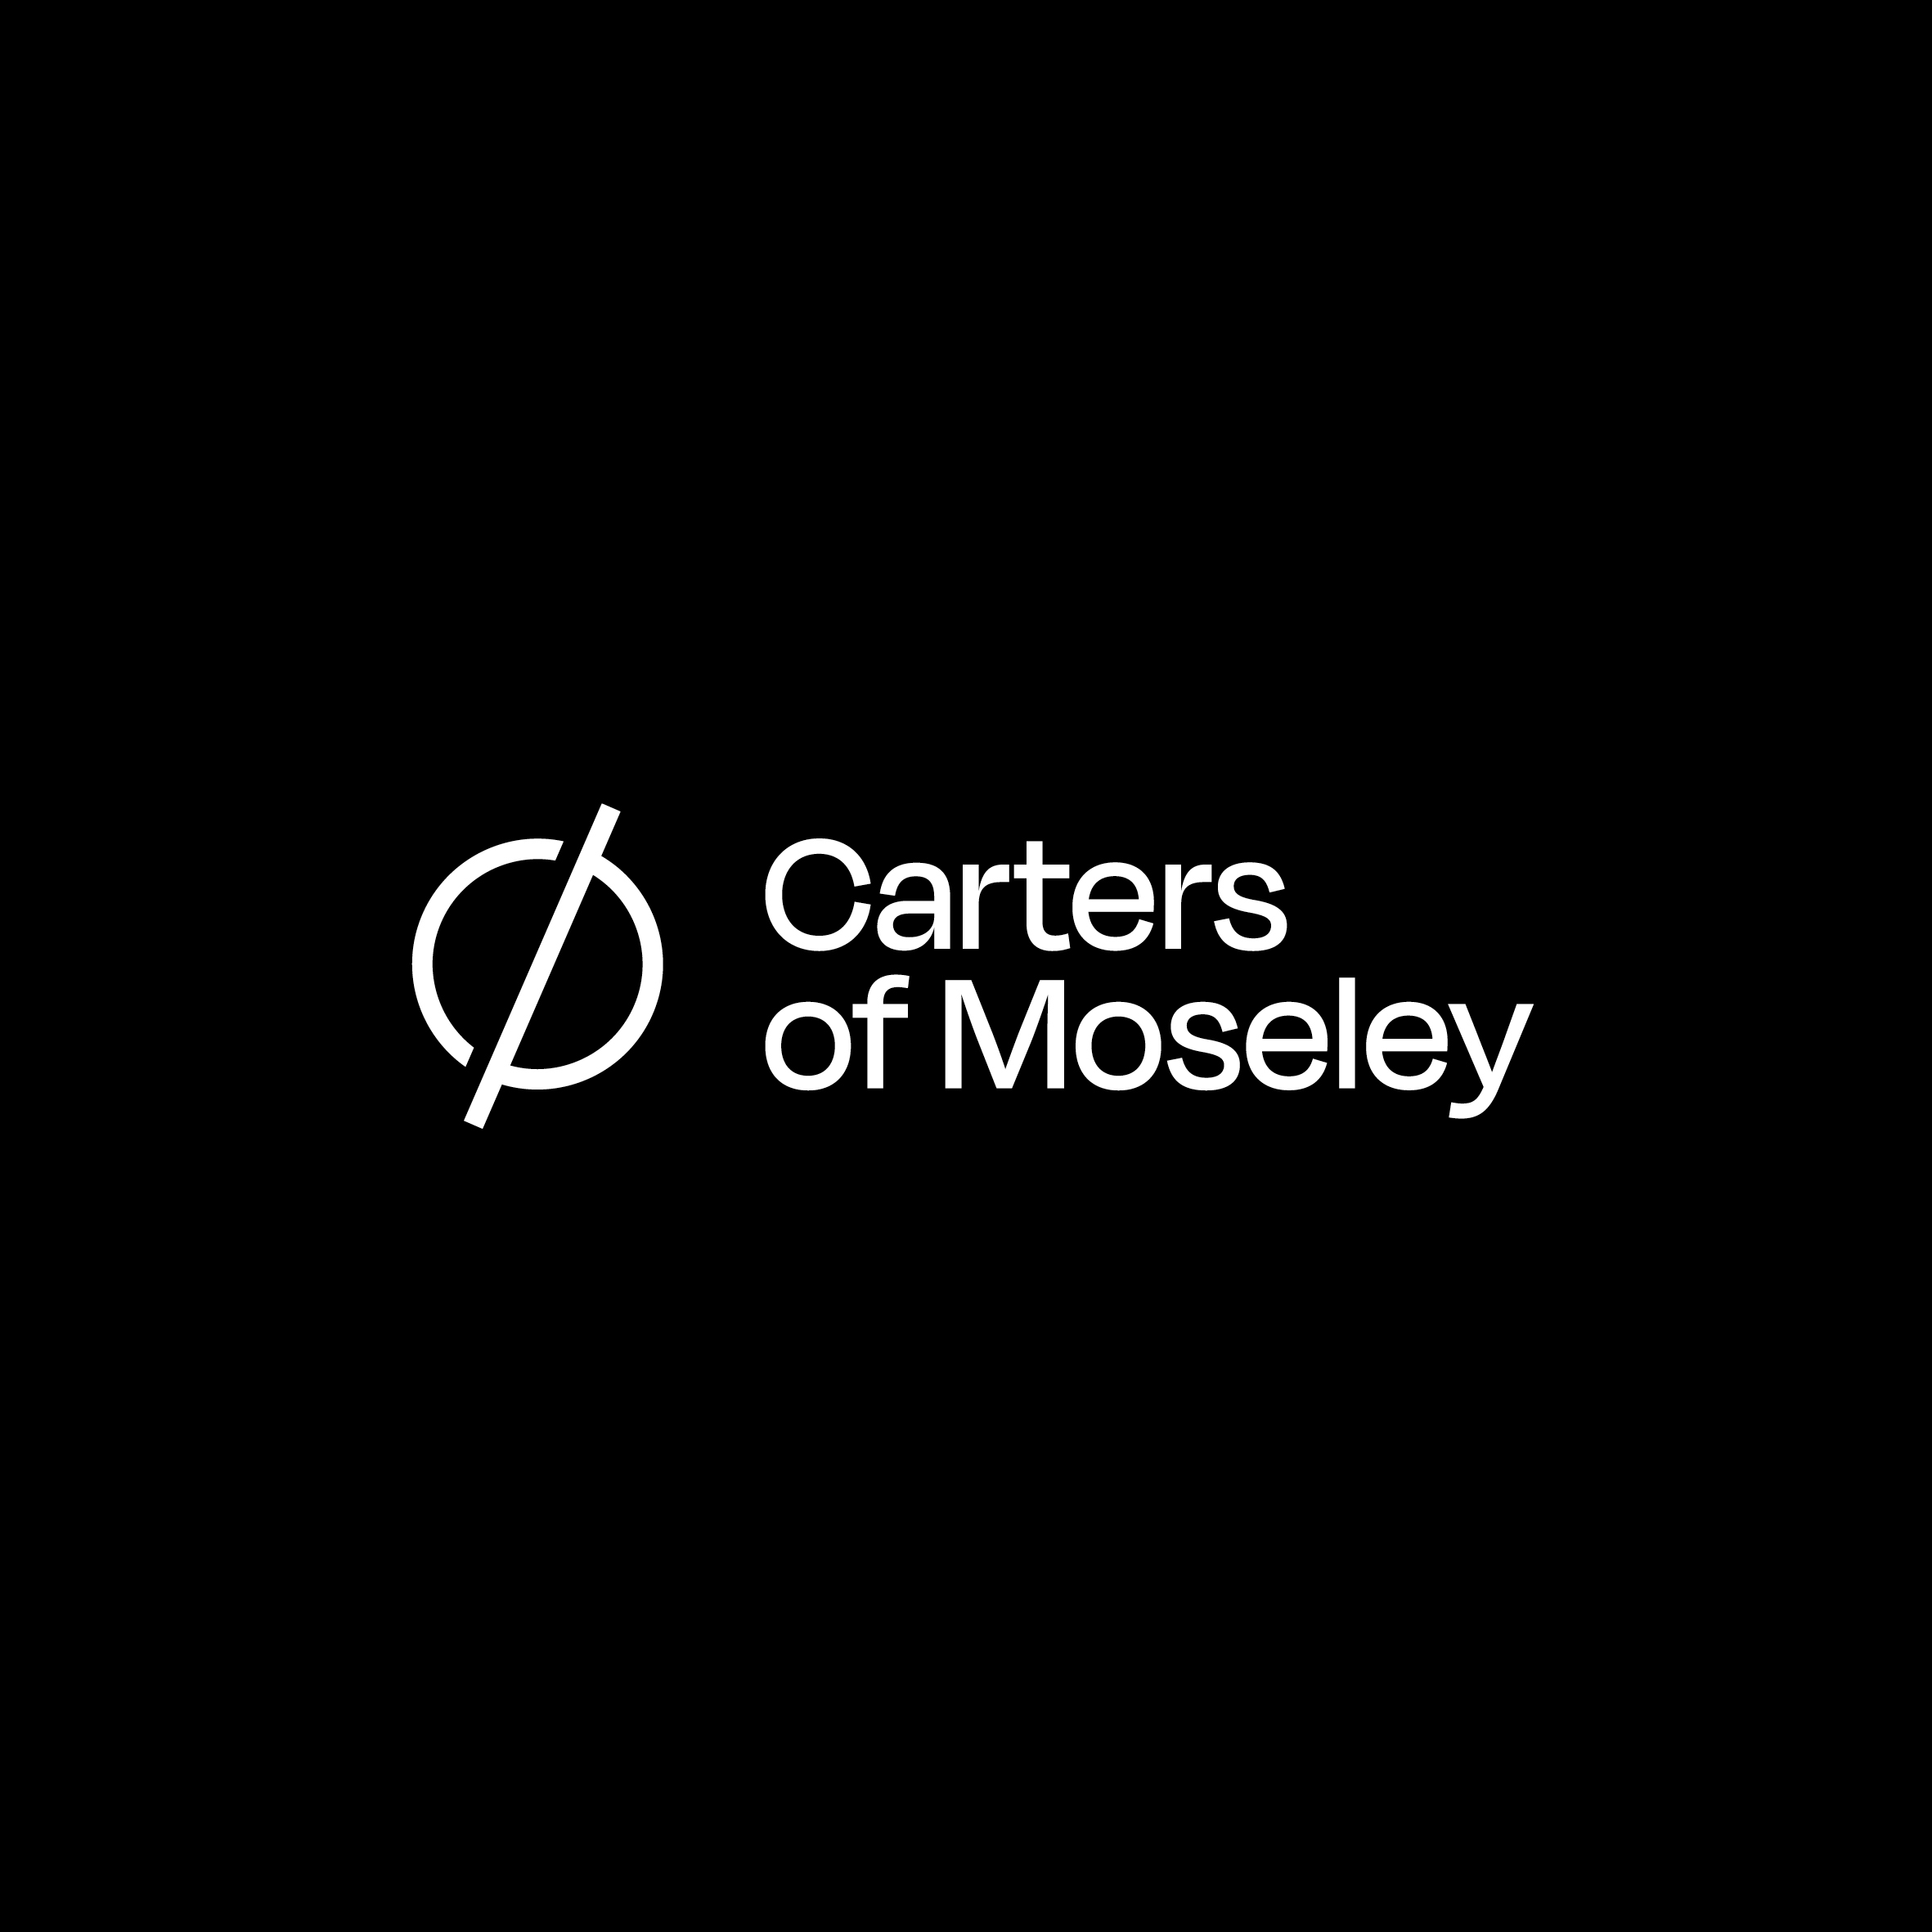 British Restaurant Carters of Moseley Rebranded by Common Curiosity